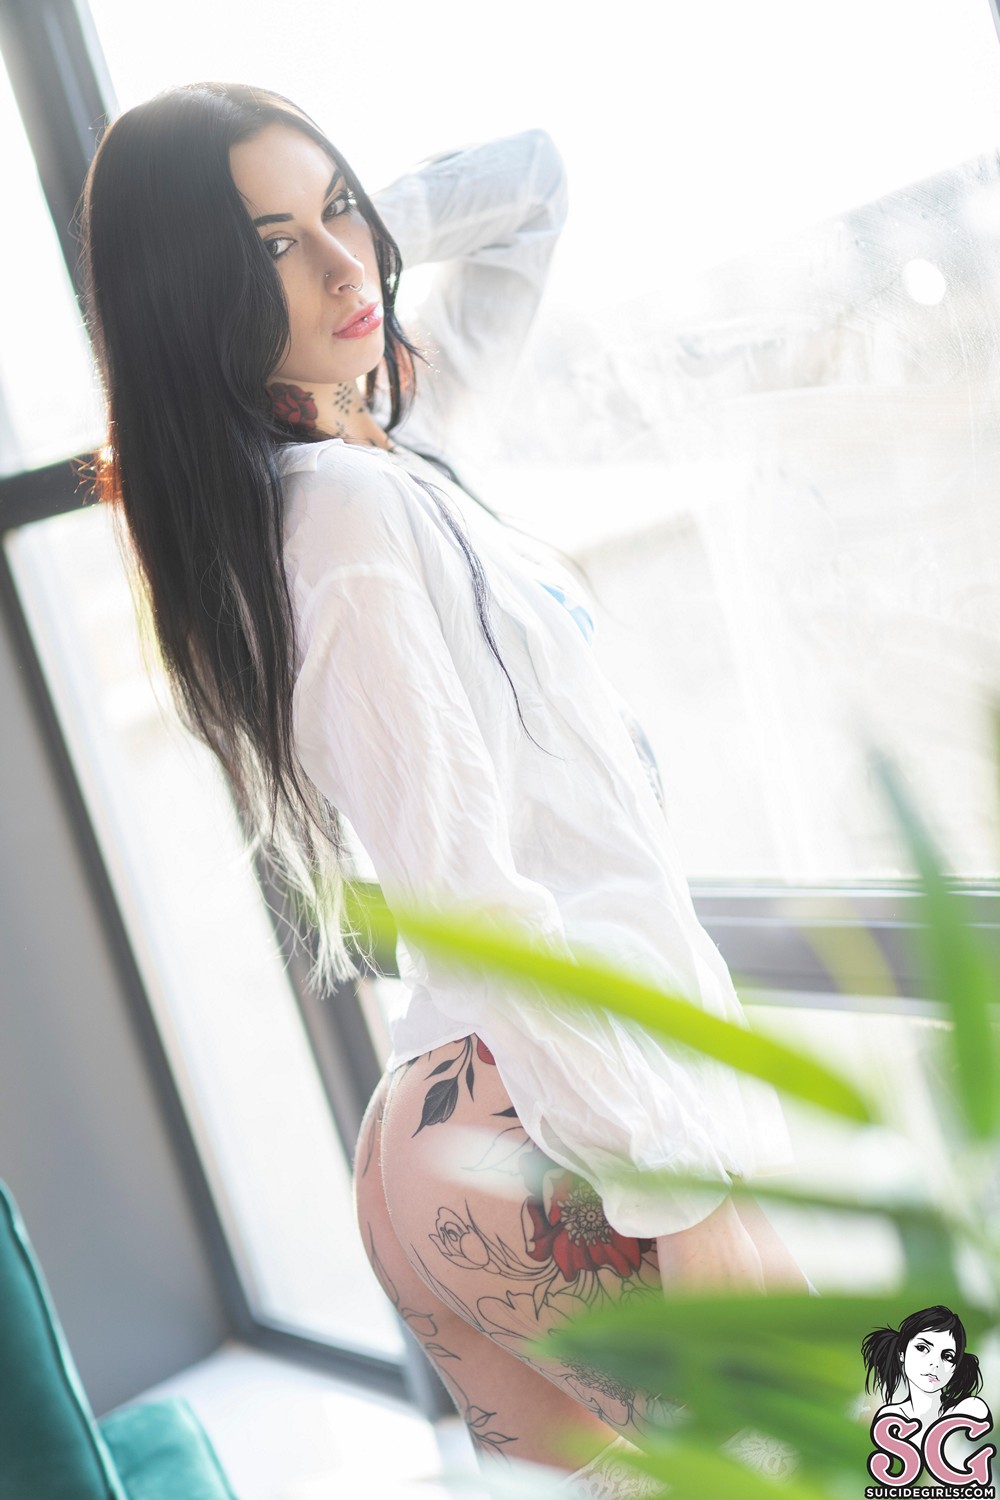 【Suicide Girls】Aug 16, 2022 - Sprite - Fluffy white clouds【50P】 - 貼圖 - 歐美寫真 -